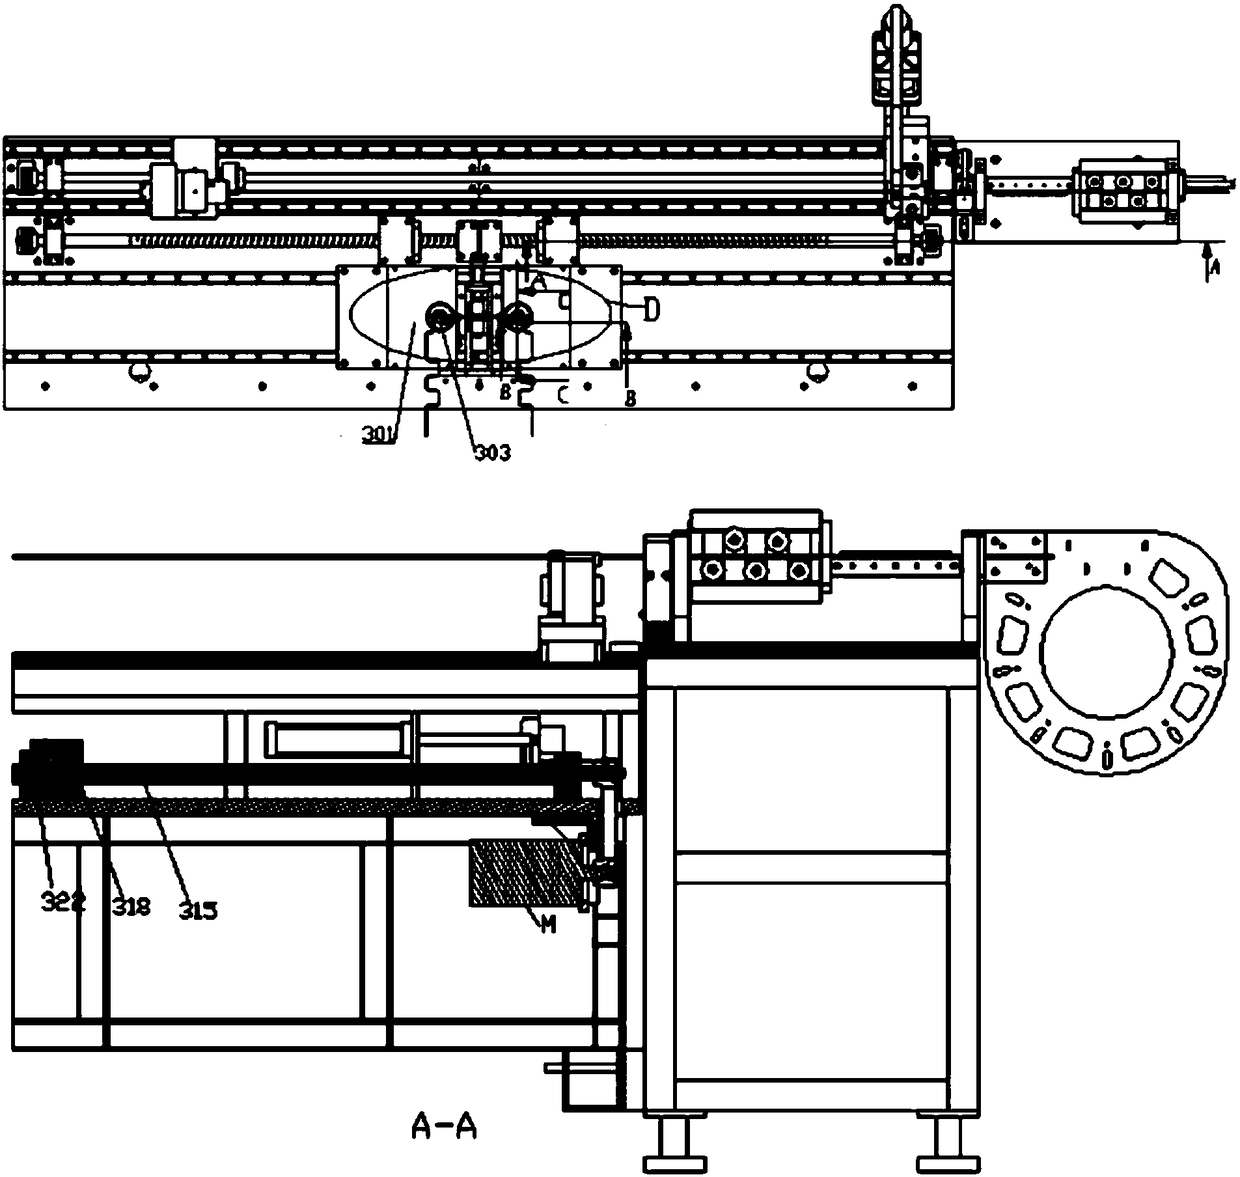 Double-head seven-axis forming machine